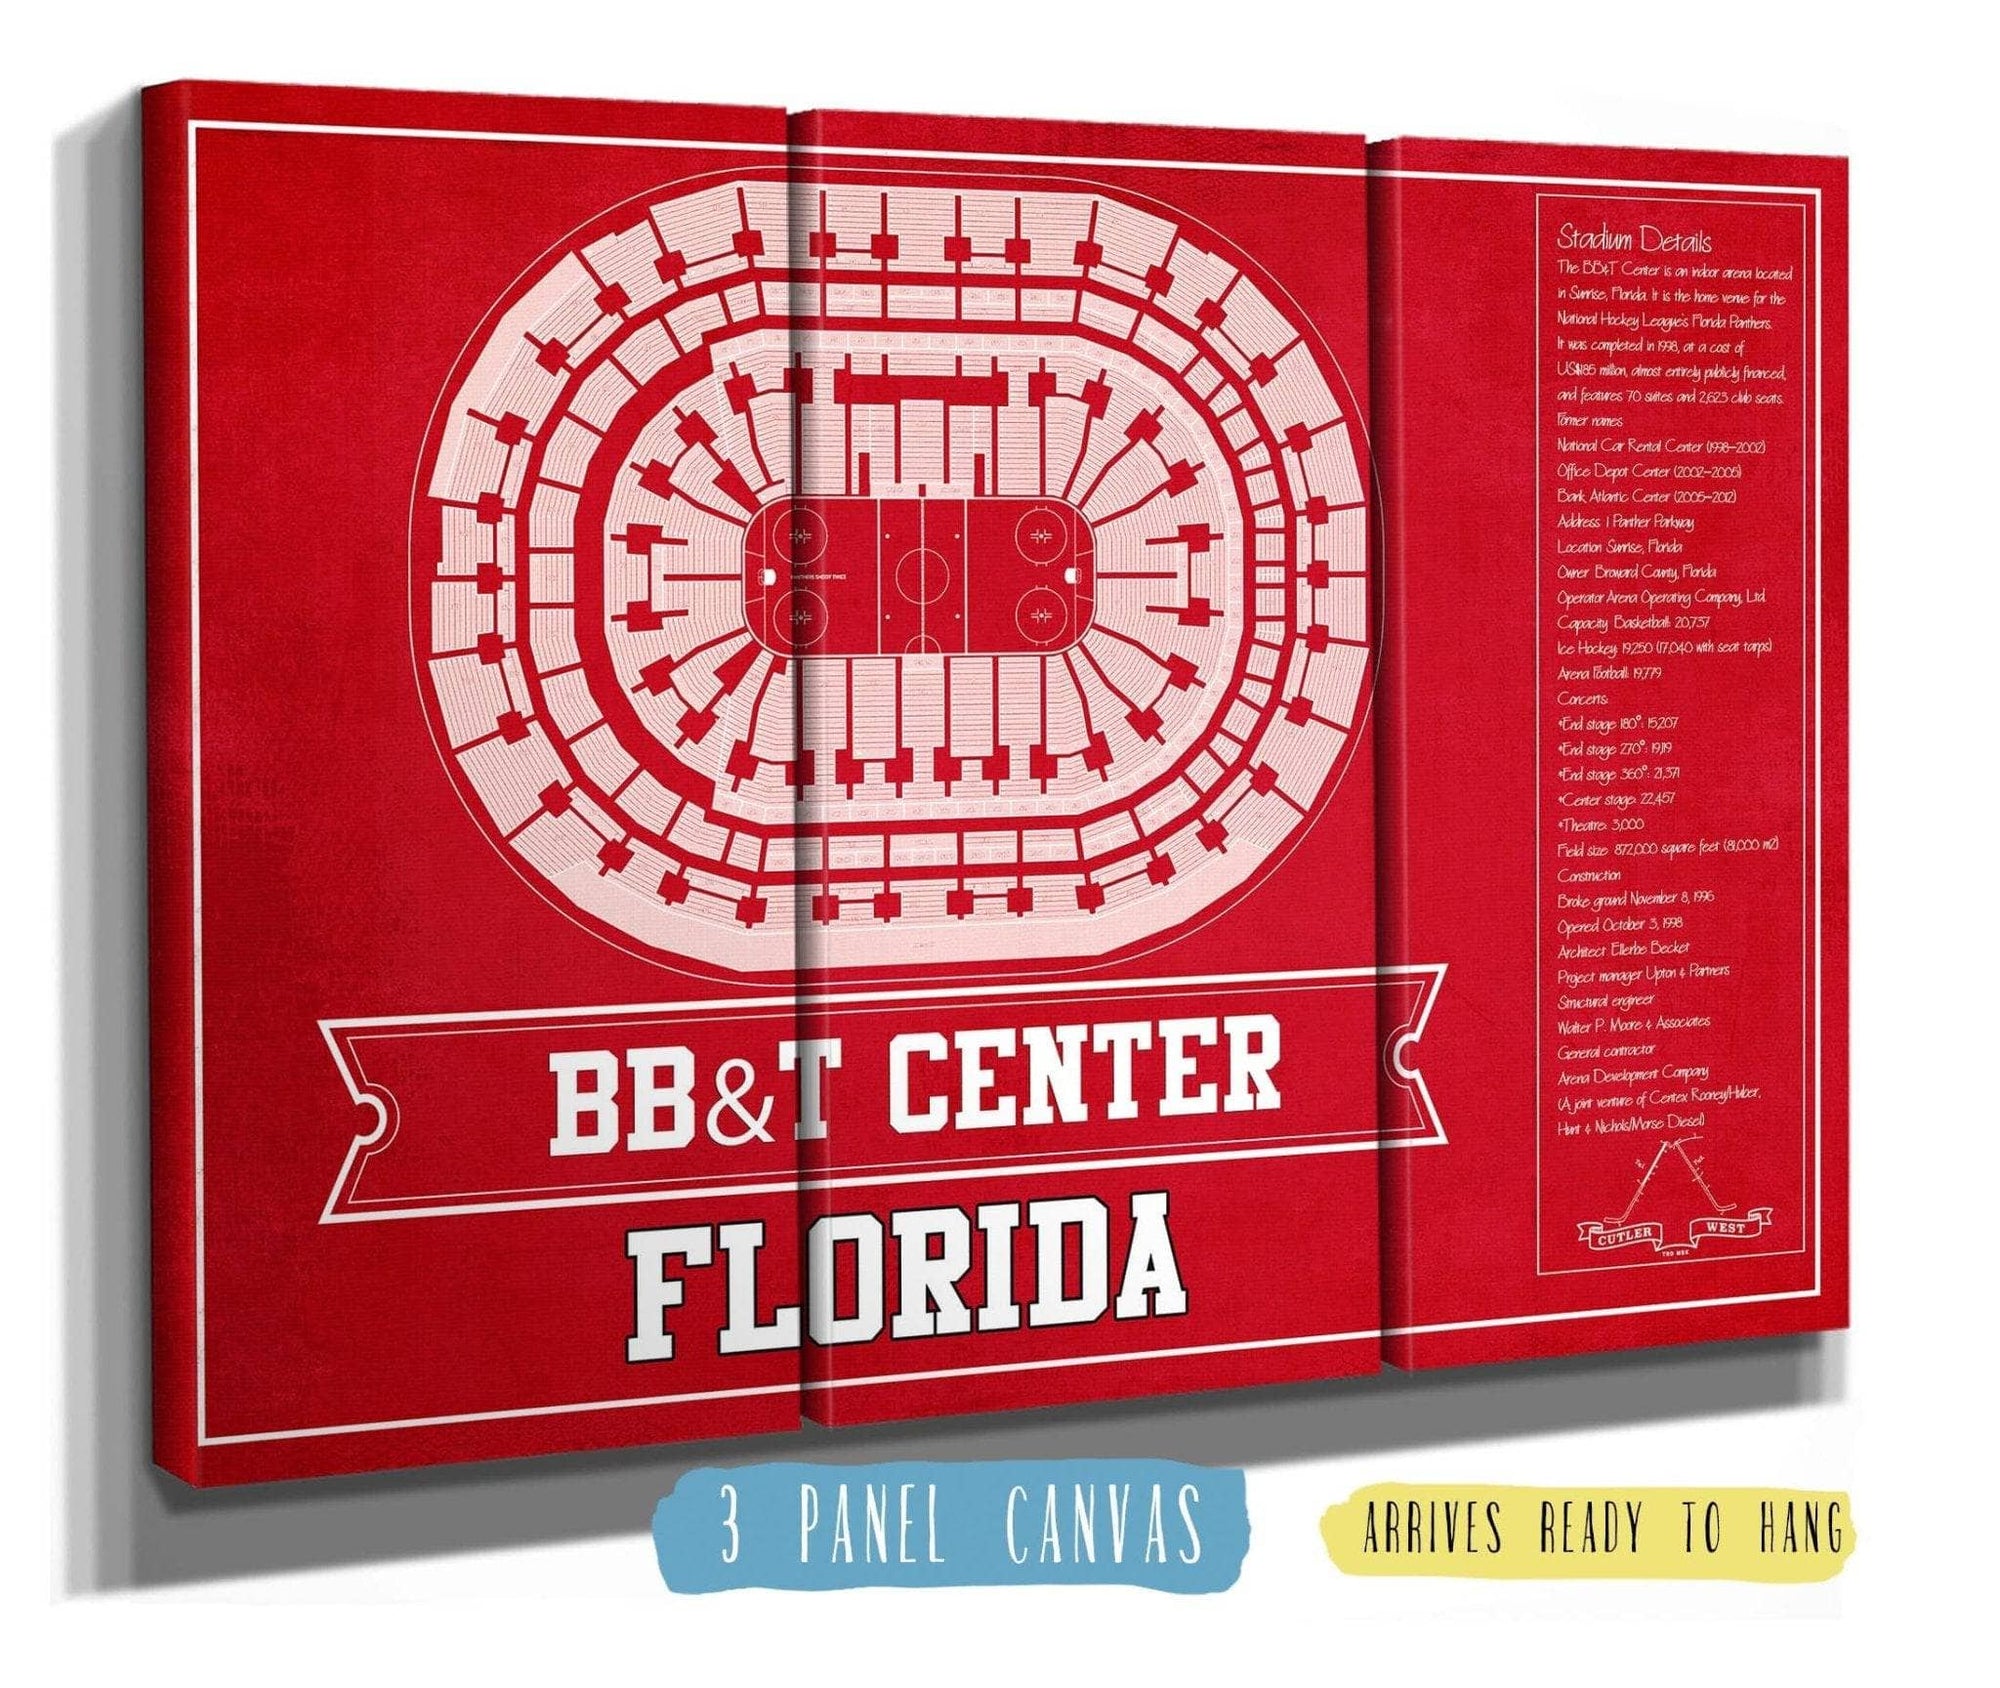 Cutler West 48" x 32" / 3 Panel Canvas Wrap Florida Panthers BB&T Center Seating Chart - Vintage Hockey Team Color Print 659981334-TEAM